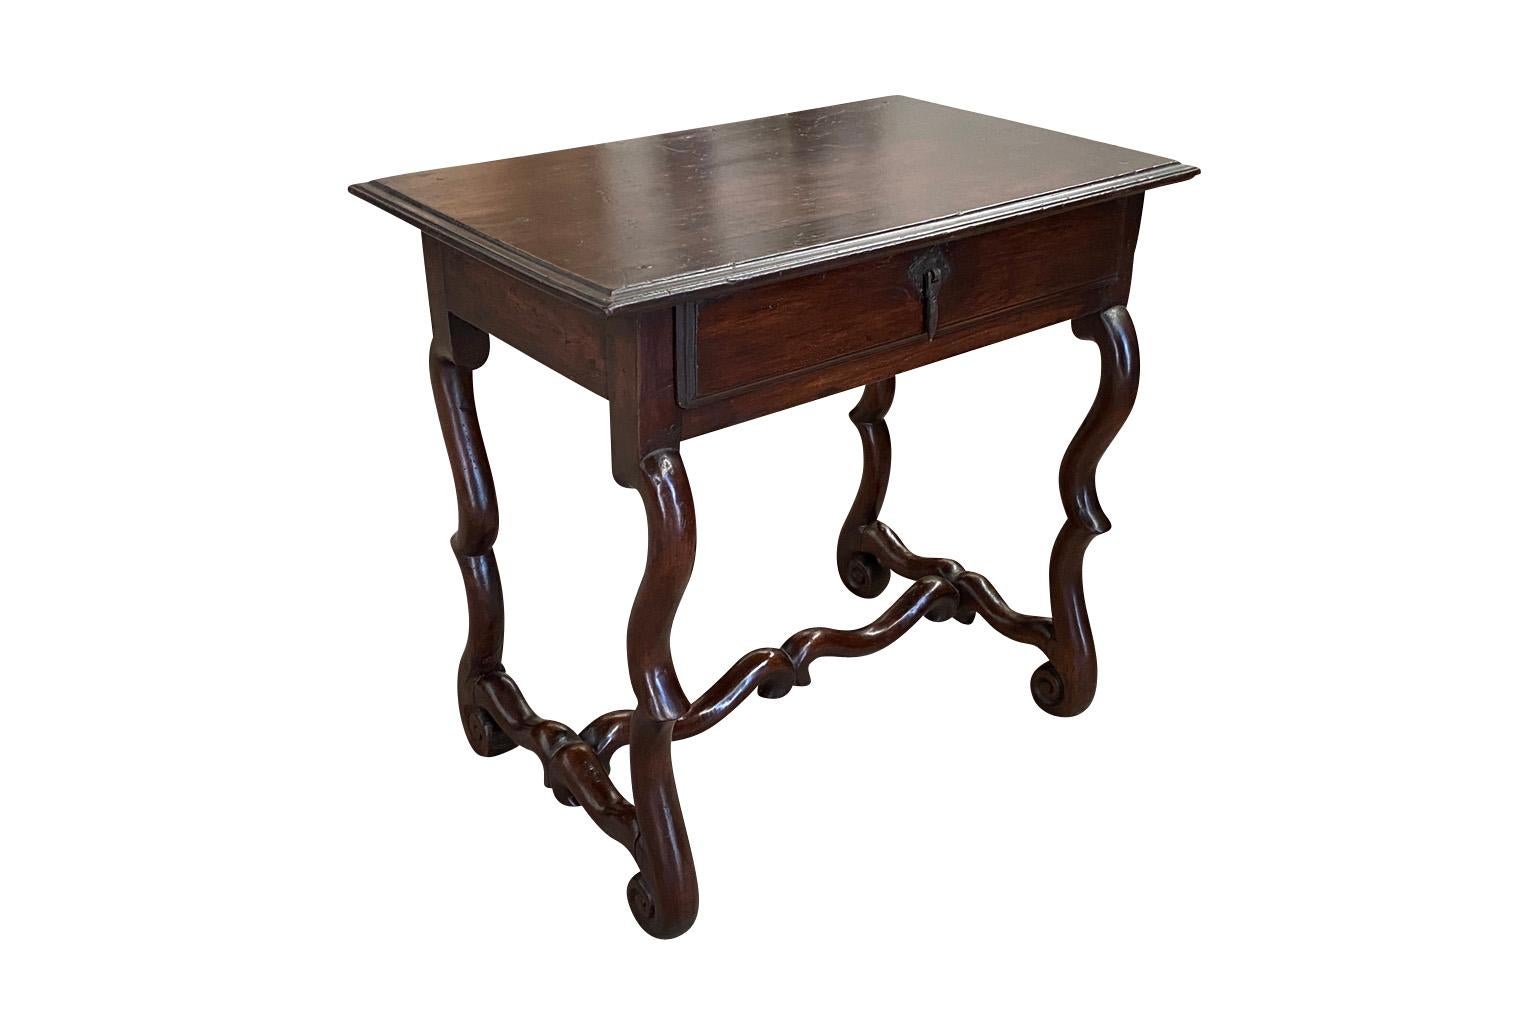 A very beautiful French mid-19th century Louis XIII style side table. Soundly constructed from beautiful walnut with a single drawer.